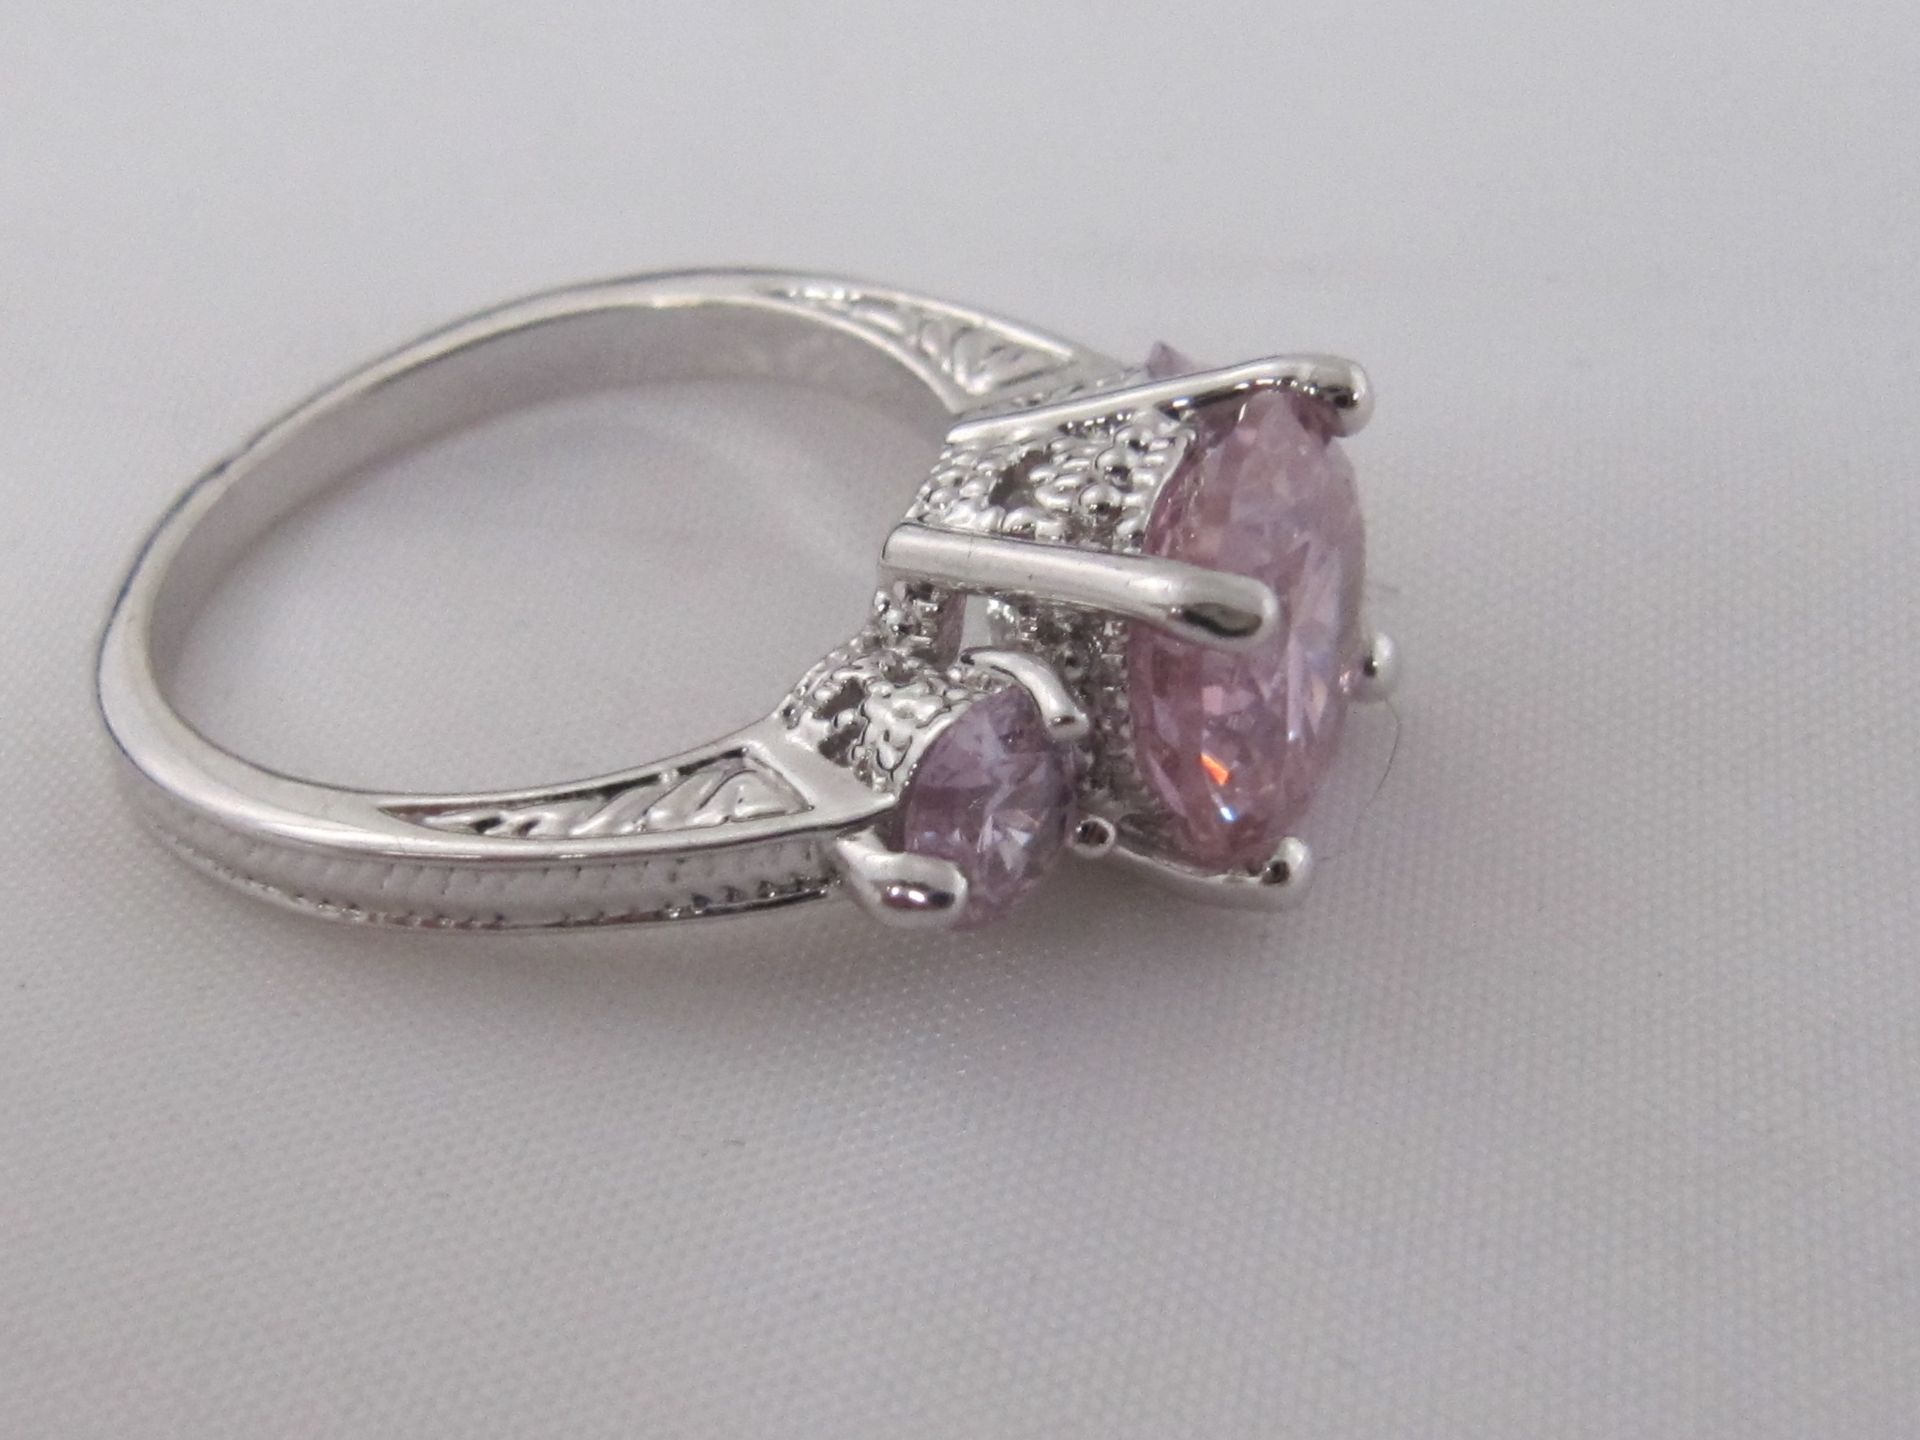 10k White Gold Filled with Pink Sapphires. Size R. - Image 4 of 5